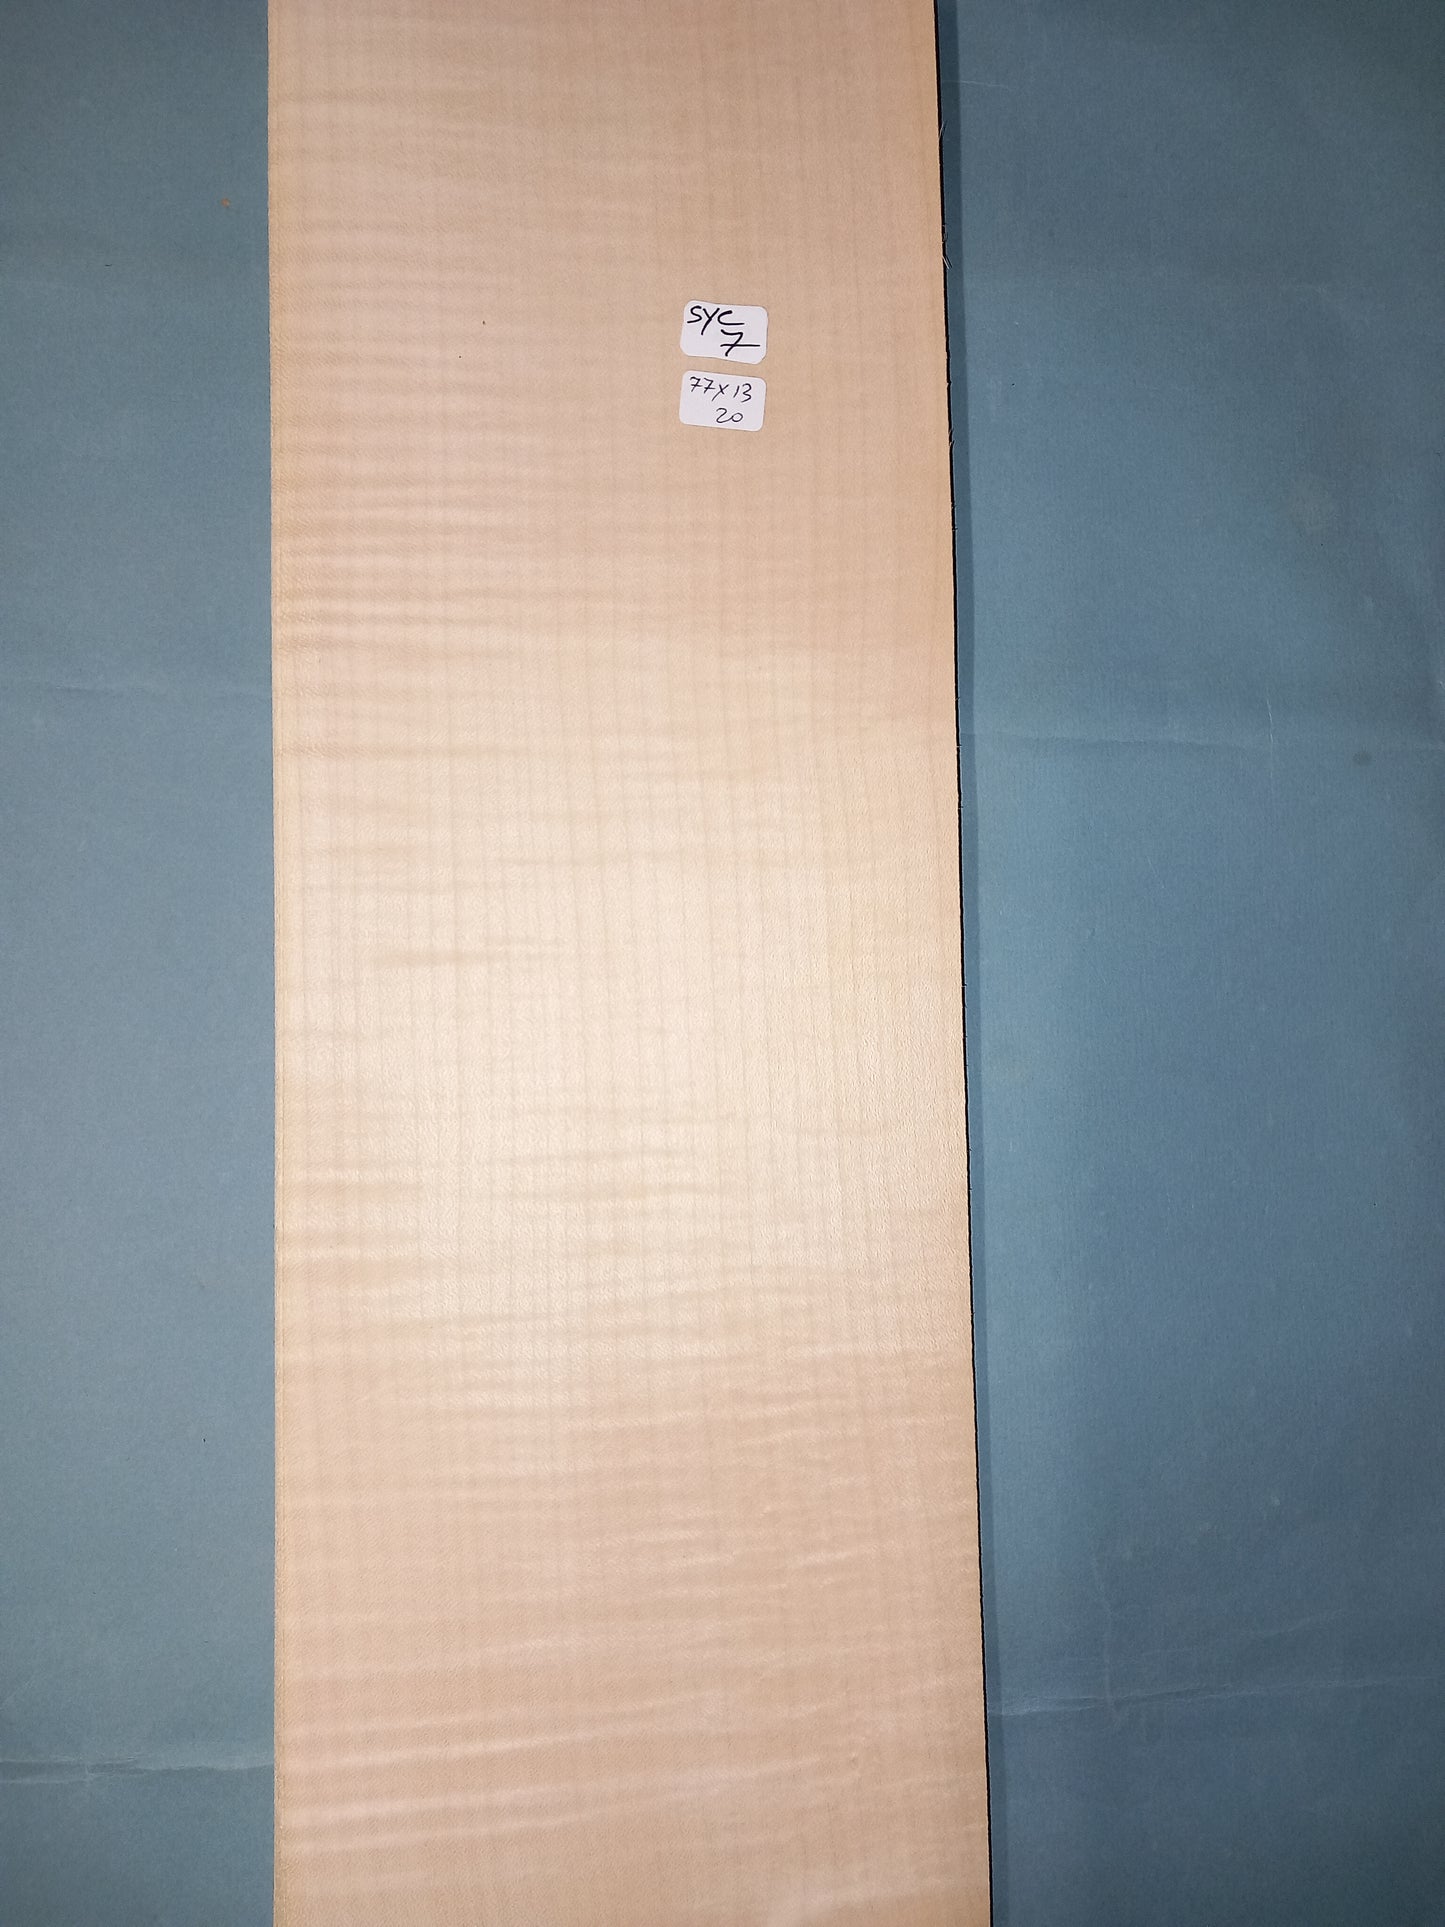 LARGE CONSECUTIVE SHEETS OF SYCAMORE VENEER     77 X 13 CM